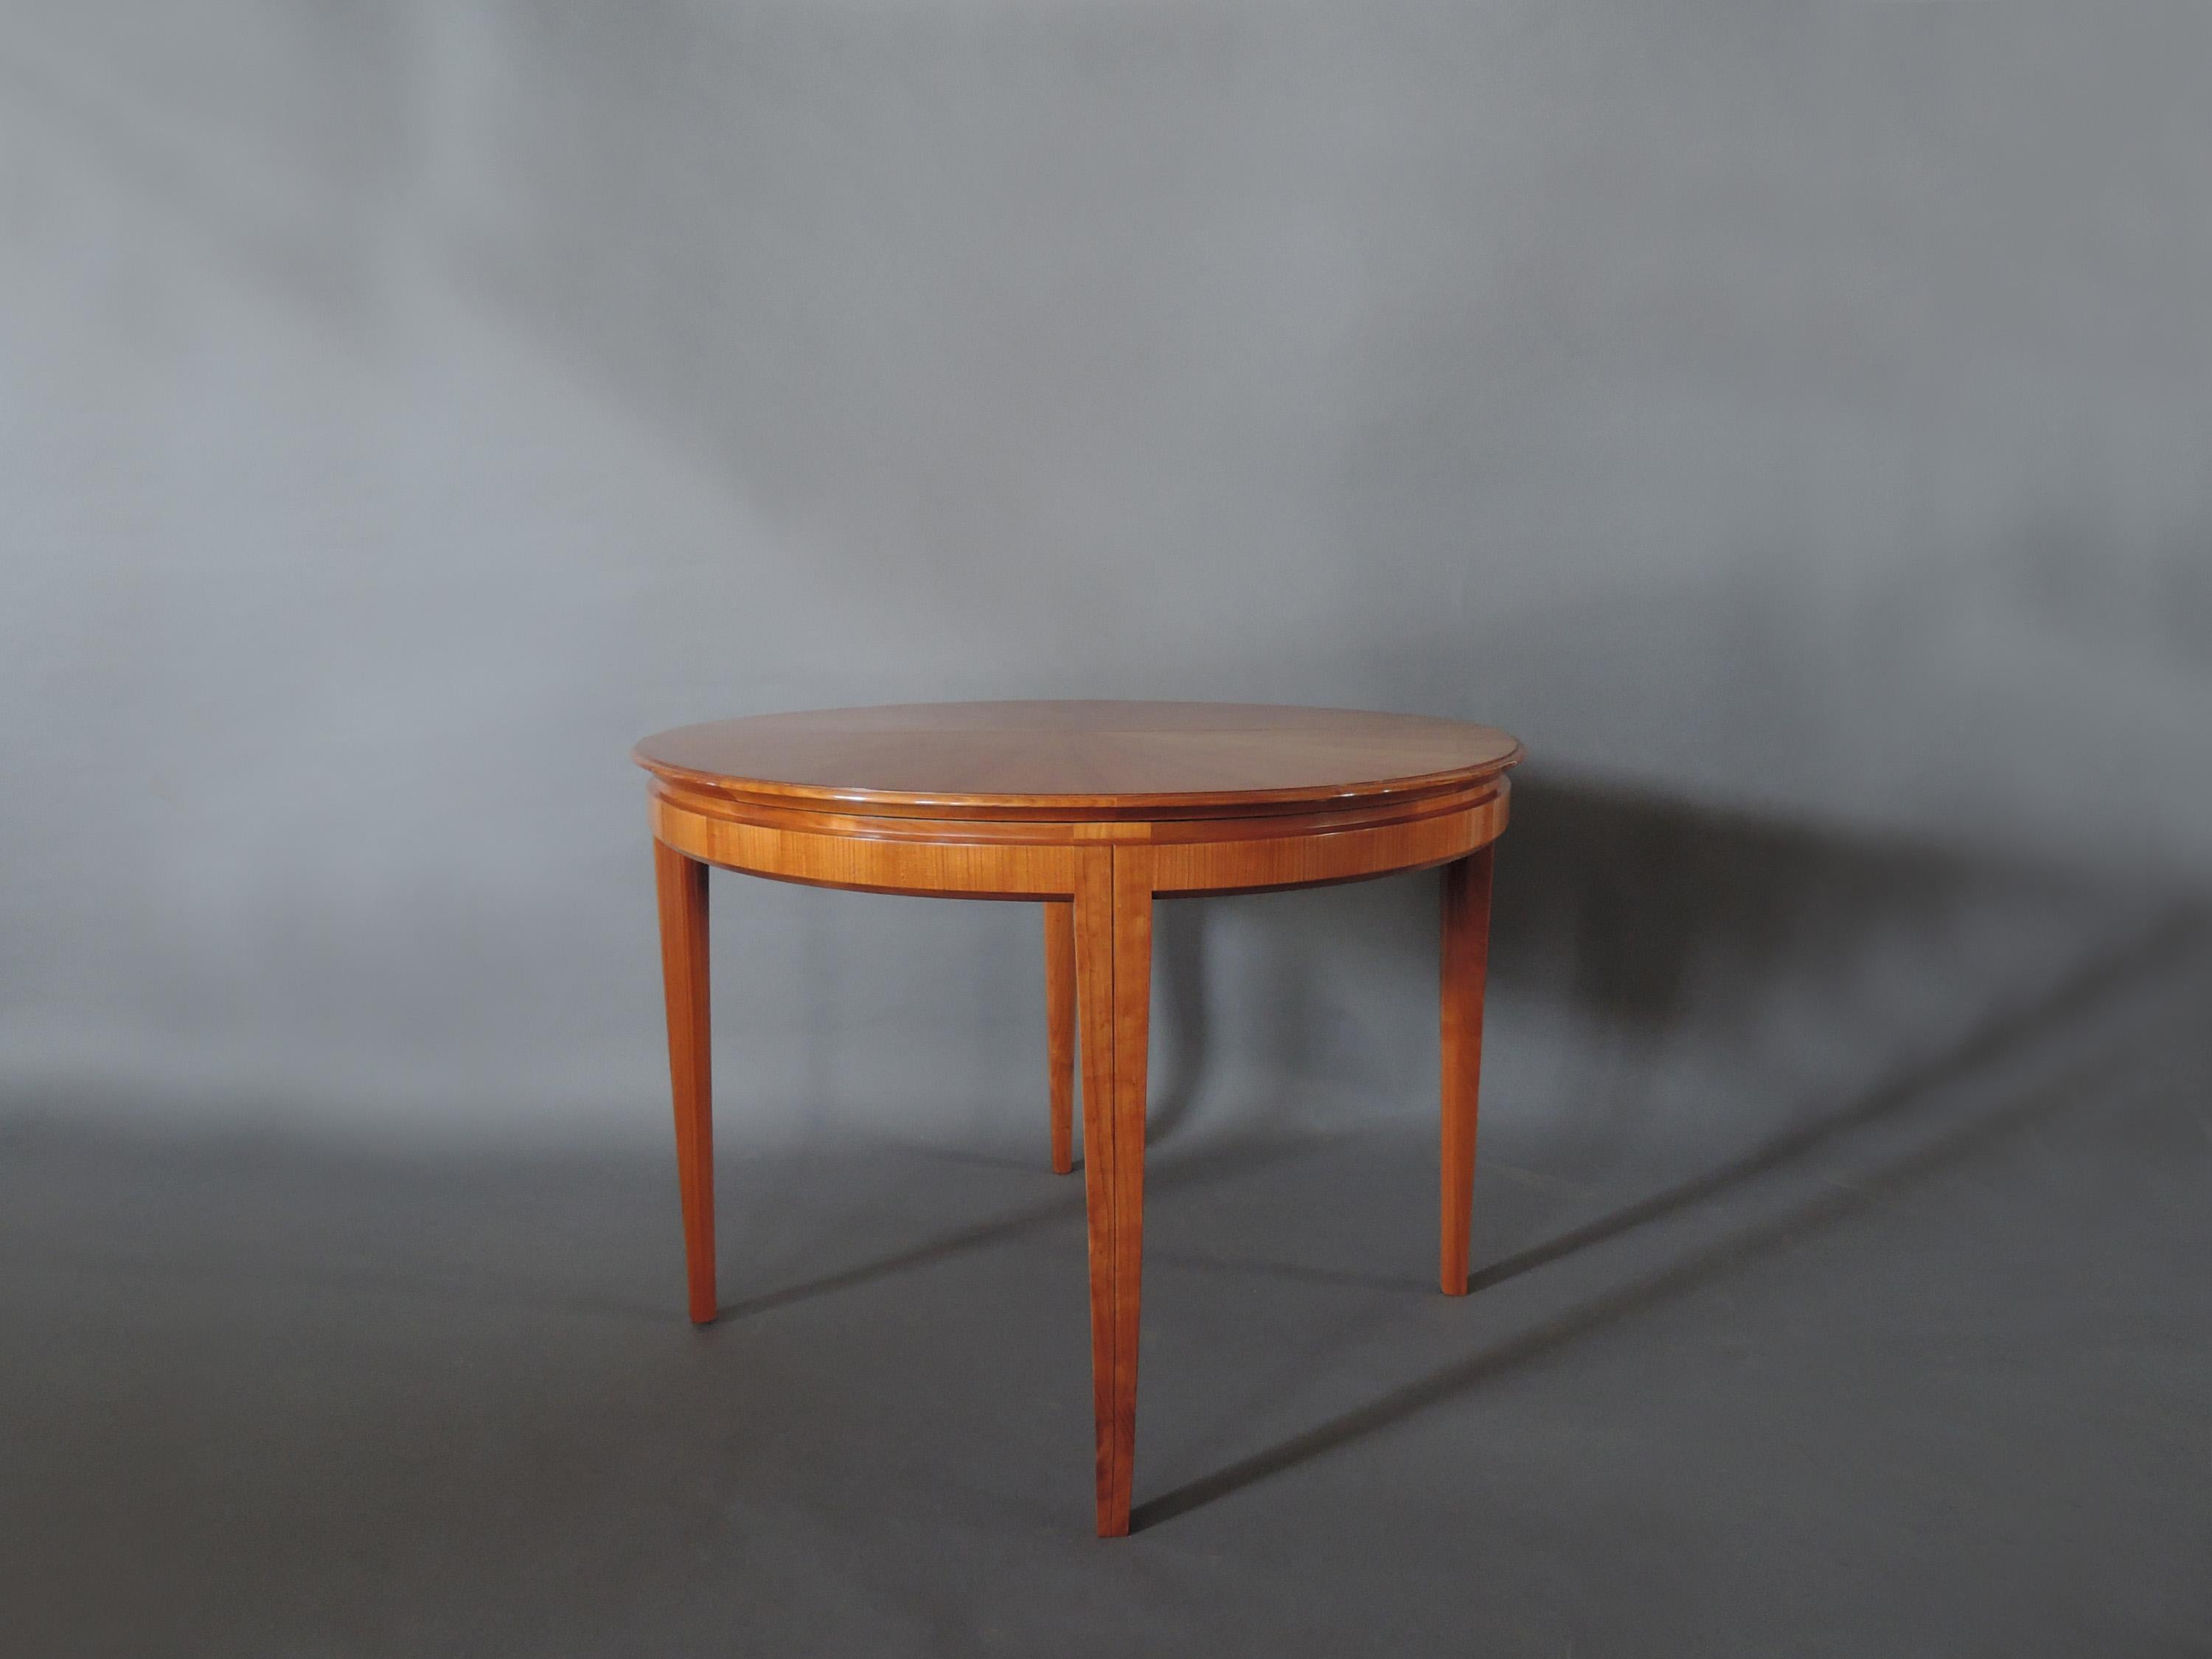 A fine French midcentury cherry round dining table divisible into two half moon consoles, with a very ingenious system that makes possible one or two center extension leaves (to be made, not included in price).